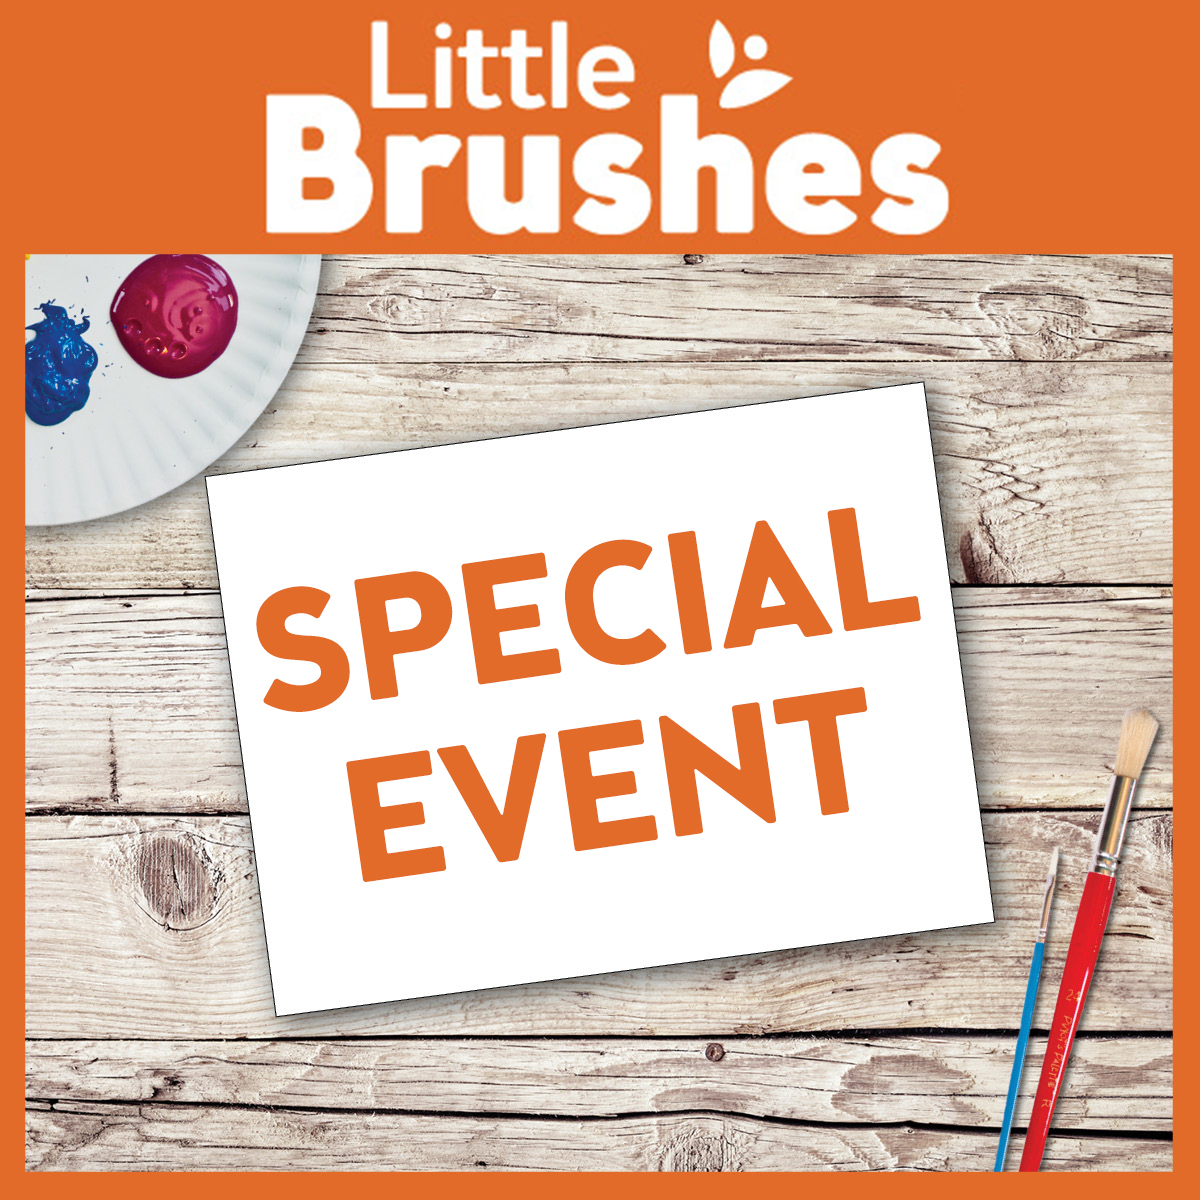 Little Brushes Special Event!